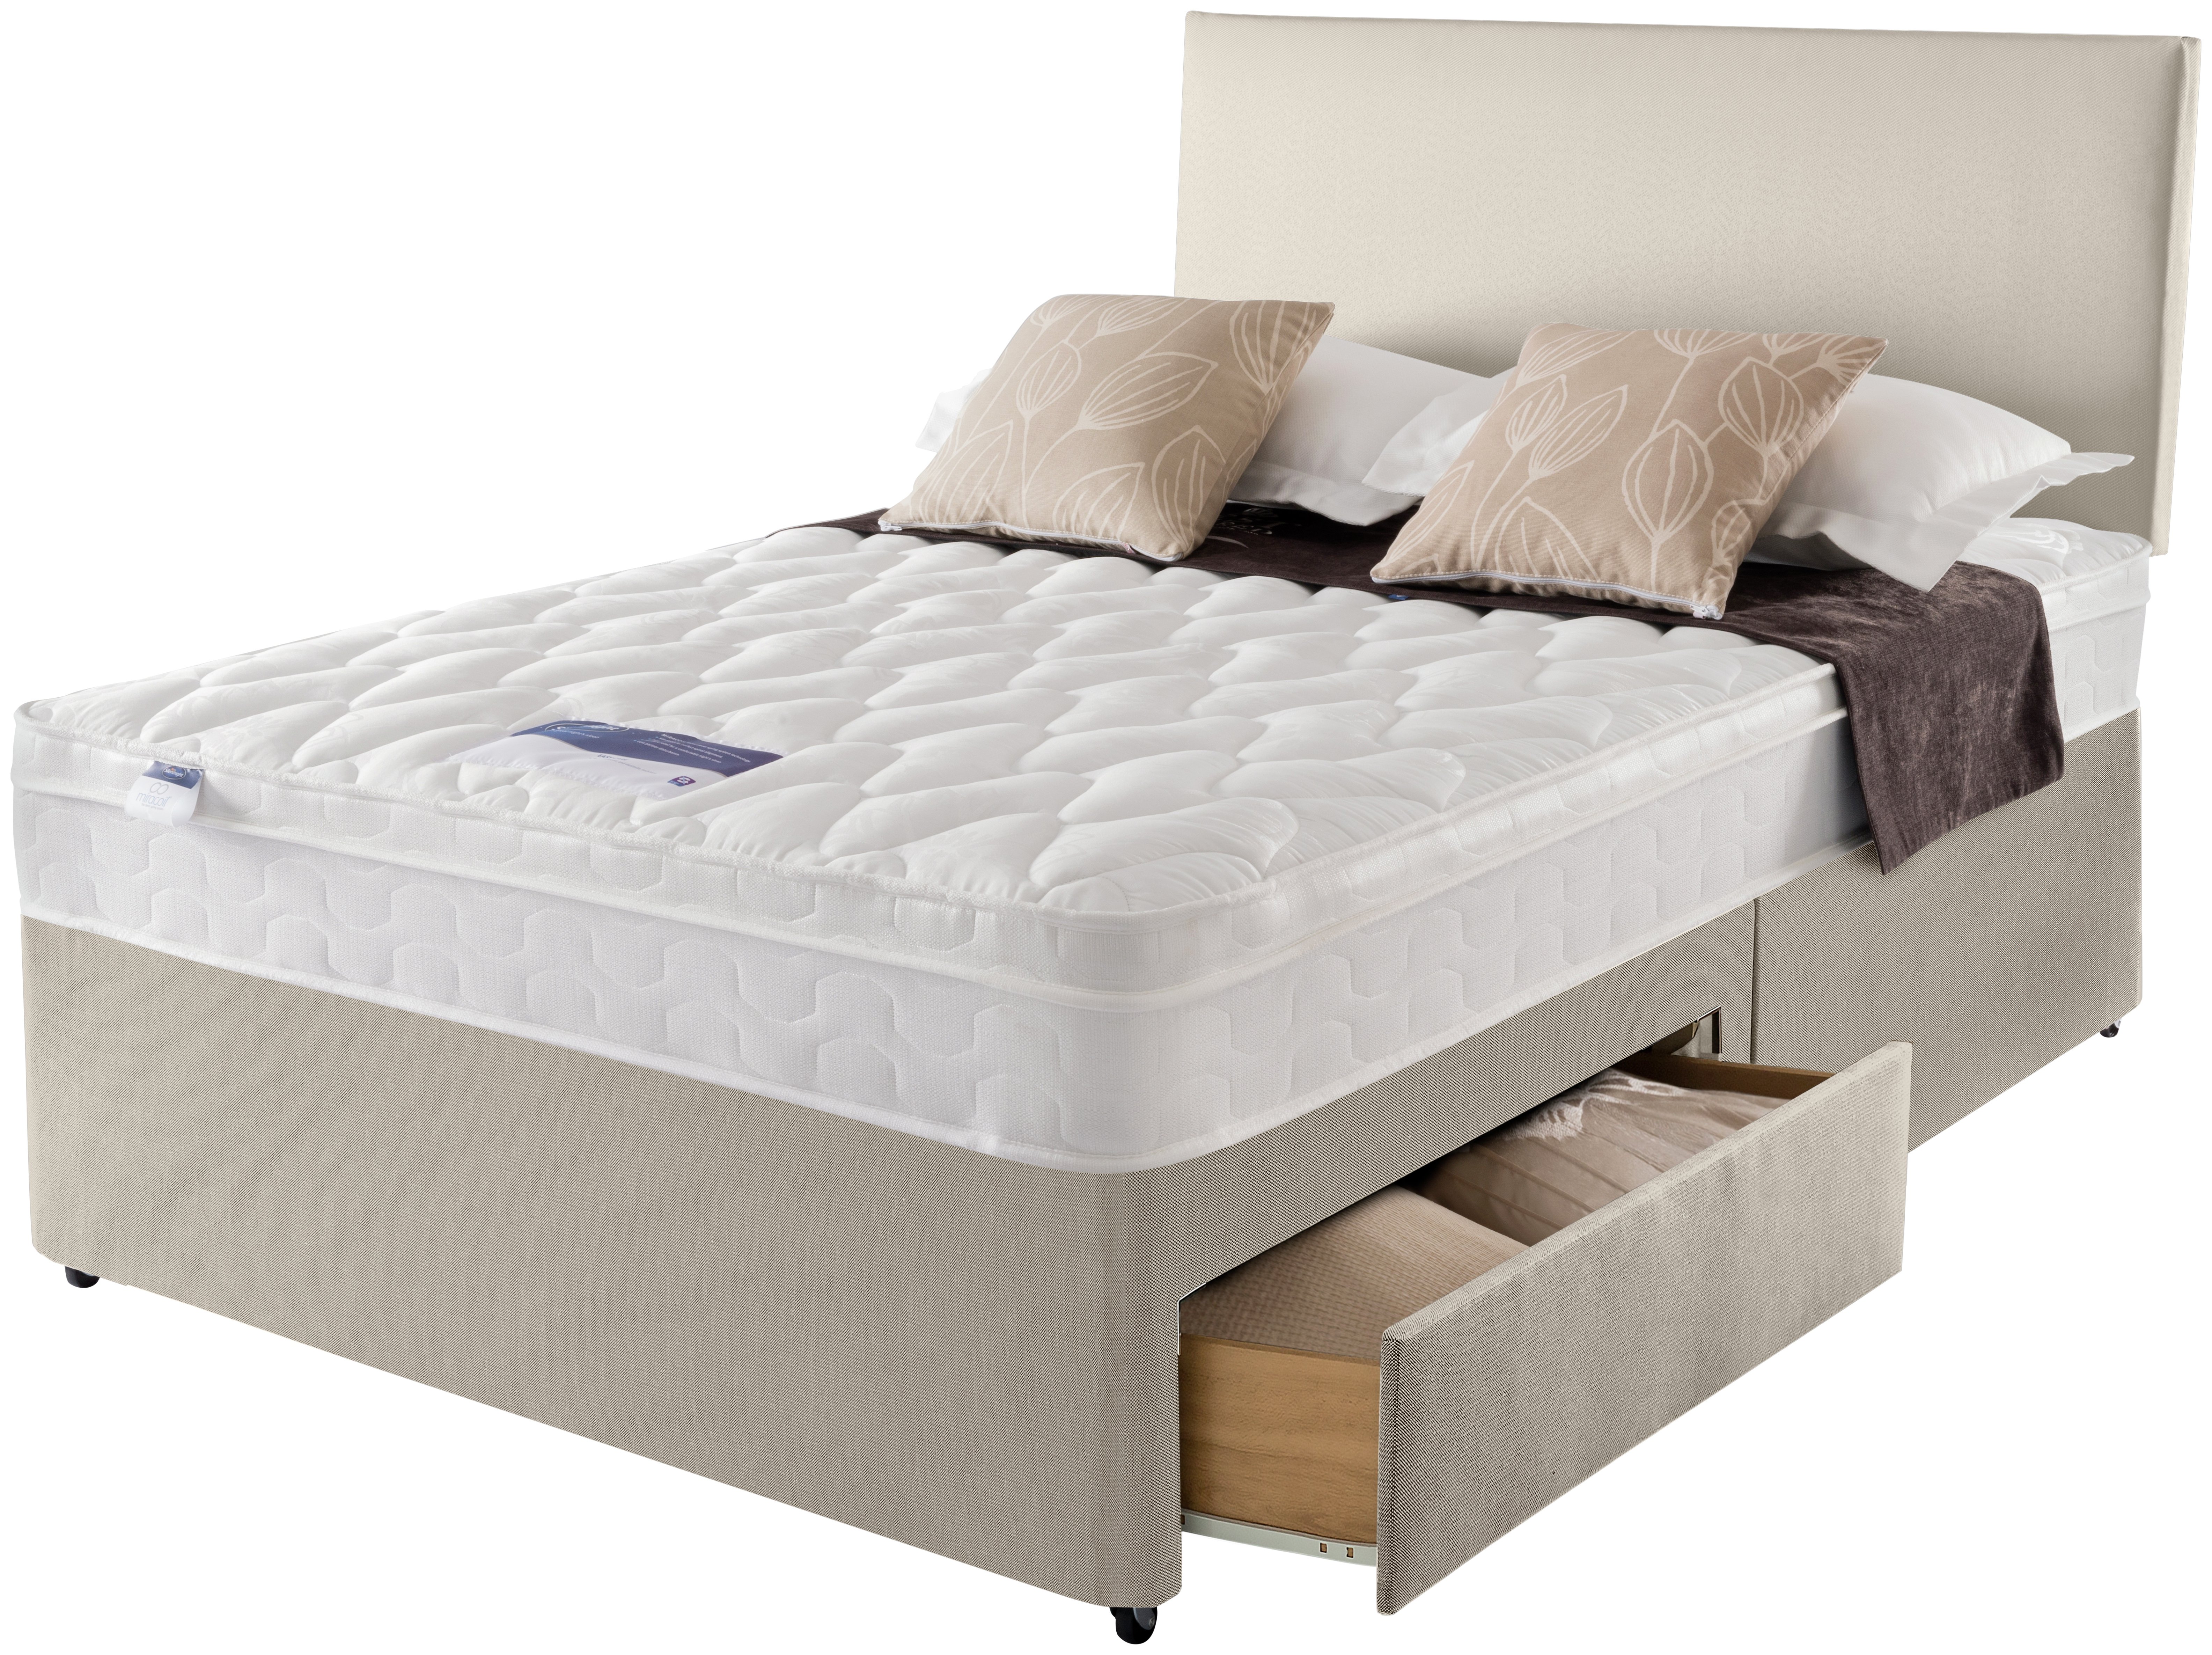 Silentnight - Auckland Natural Small - Double 2 Drawer - Divan Bed Review